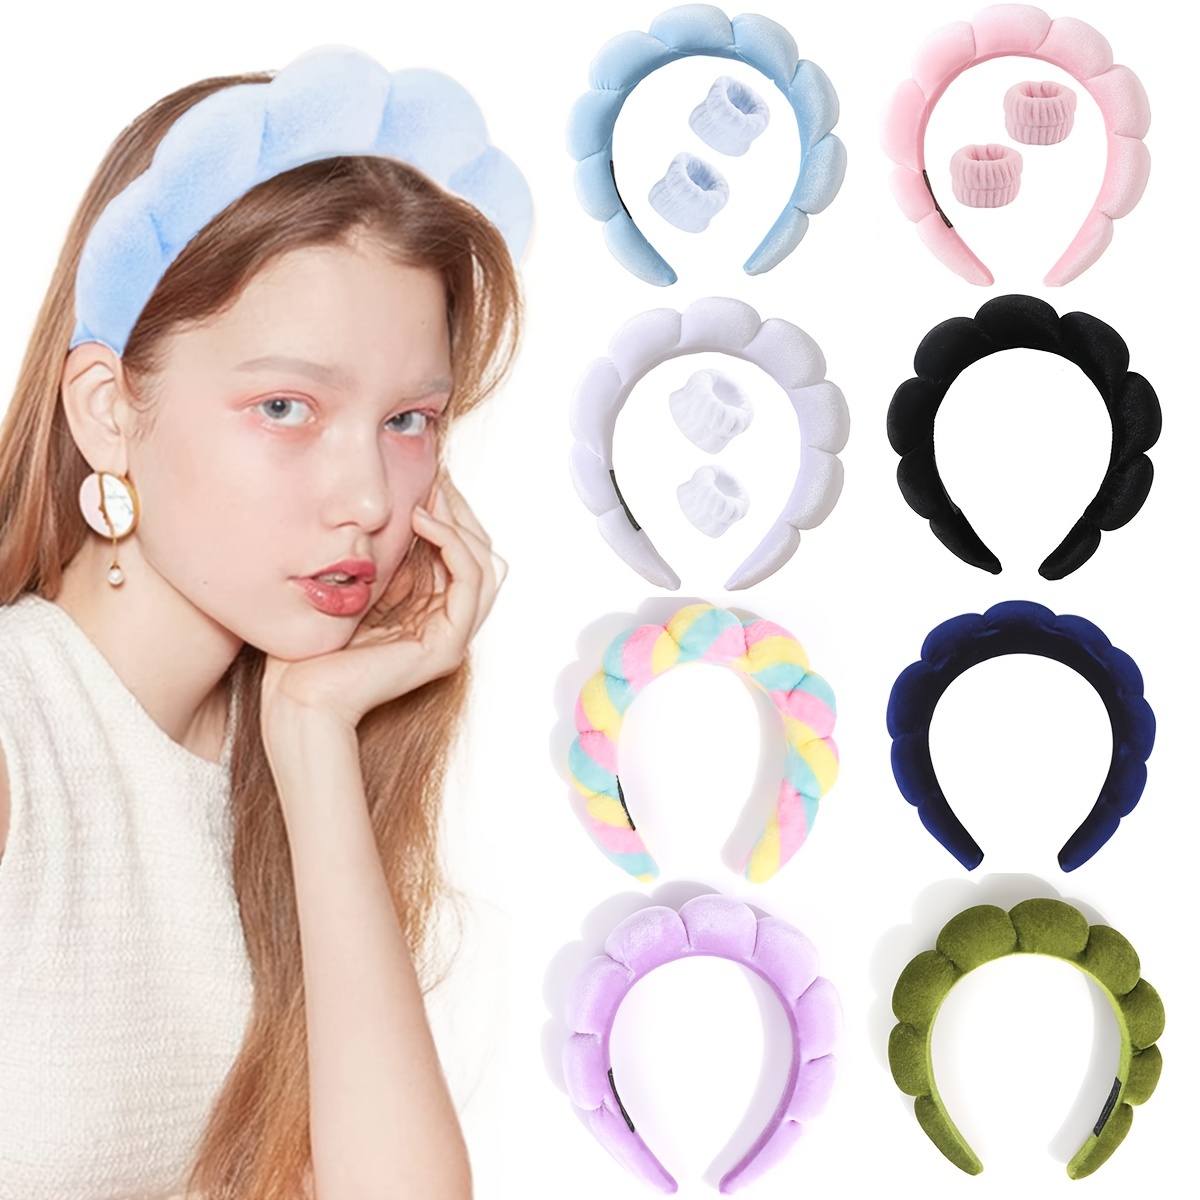 Skincare Headbands for Women Makeup,Twisted Bubble Make Up Hair Band for  Washing Face